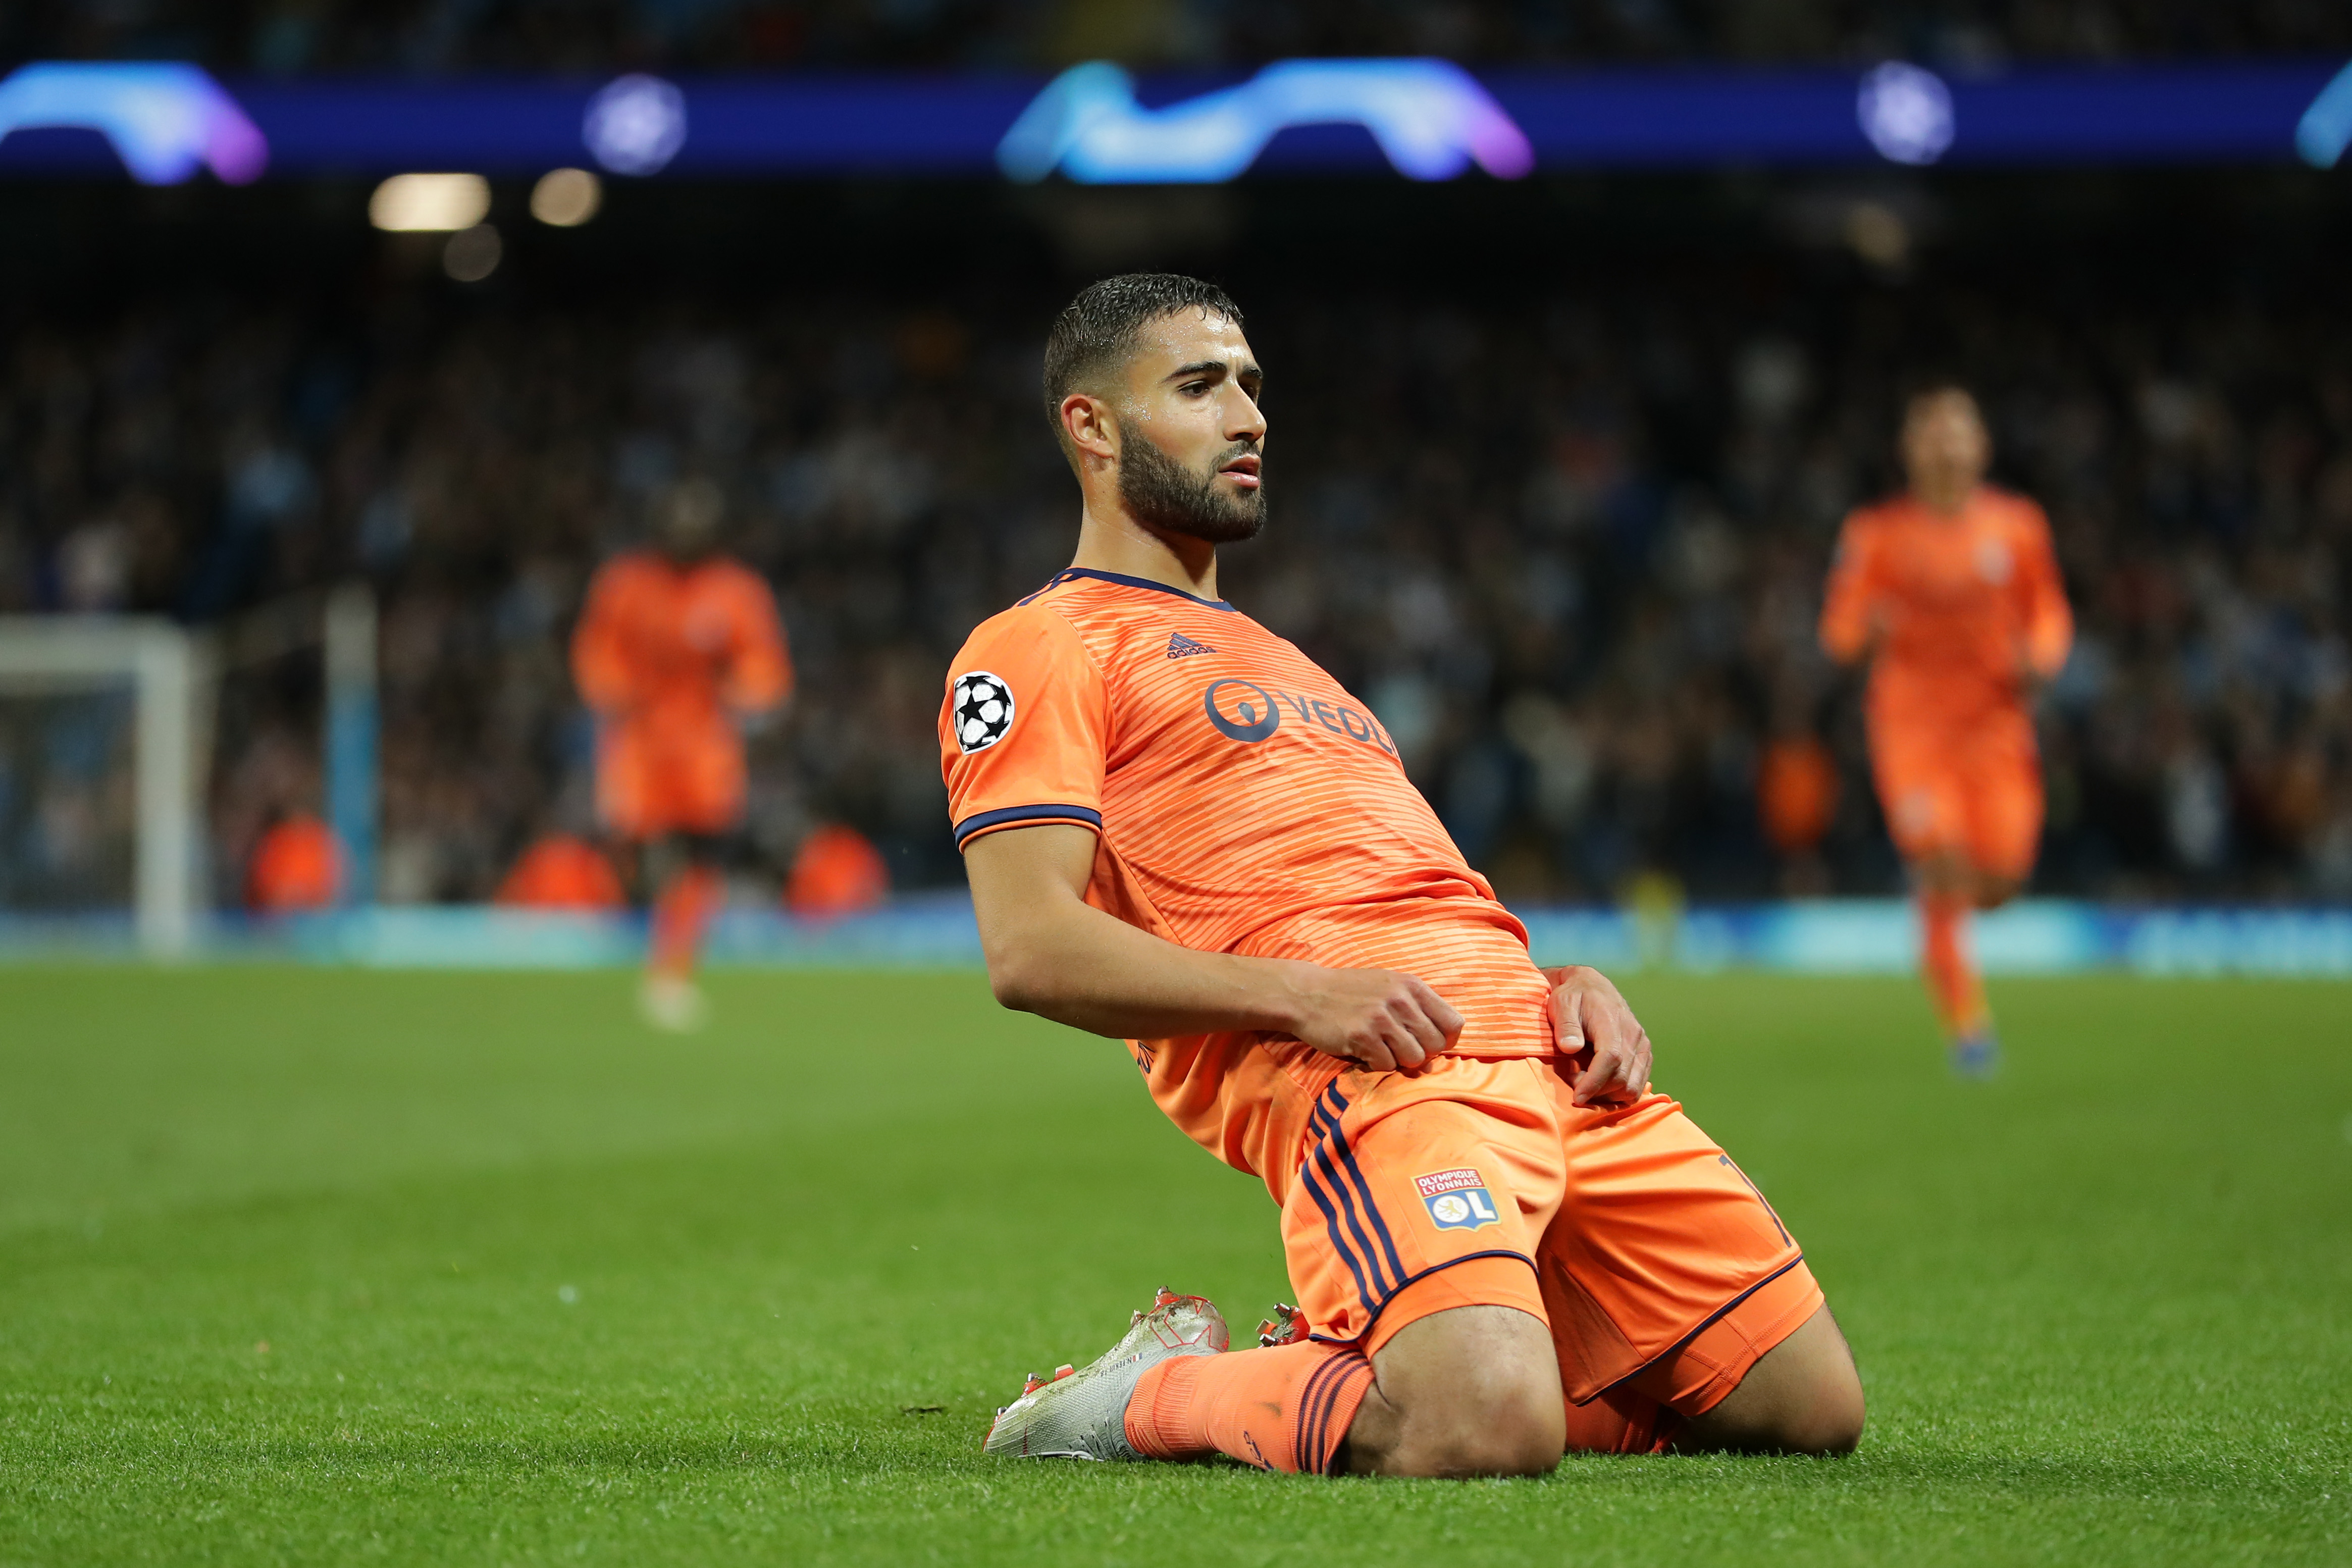 MANCHESTER, ENGLAND - SEPTEMBER 19:  Nabil Fekir of Lyon celebrates after scoring his team's second goal during the Group F match of the UEFA Champions League between Manchester City and Olympique Lyonnais at Etihad Stadium on September 19, 2018 in Manchester, United Kingdom.  (Photo by Richard Heathcote/Getty Images)